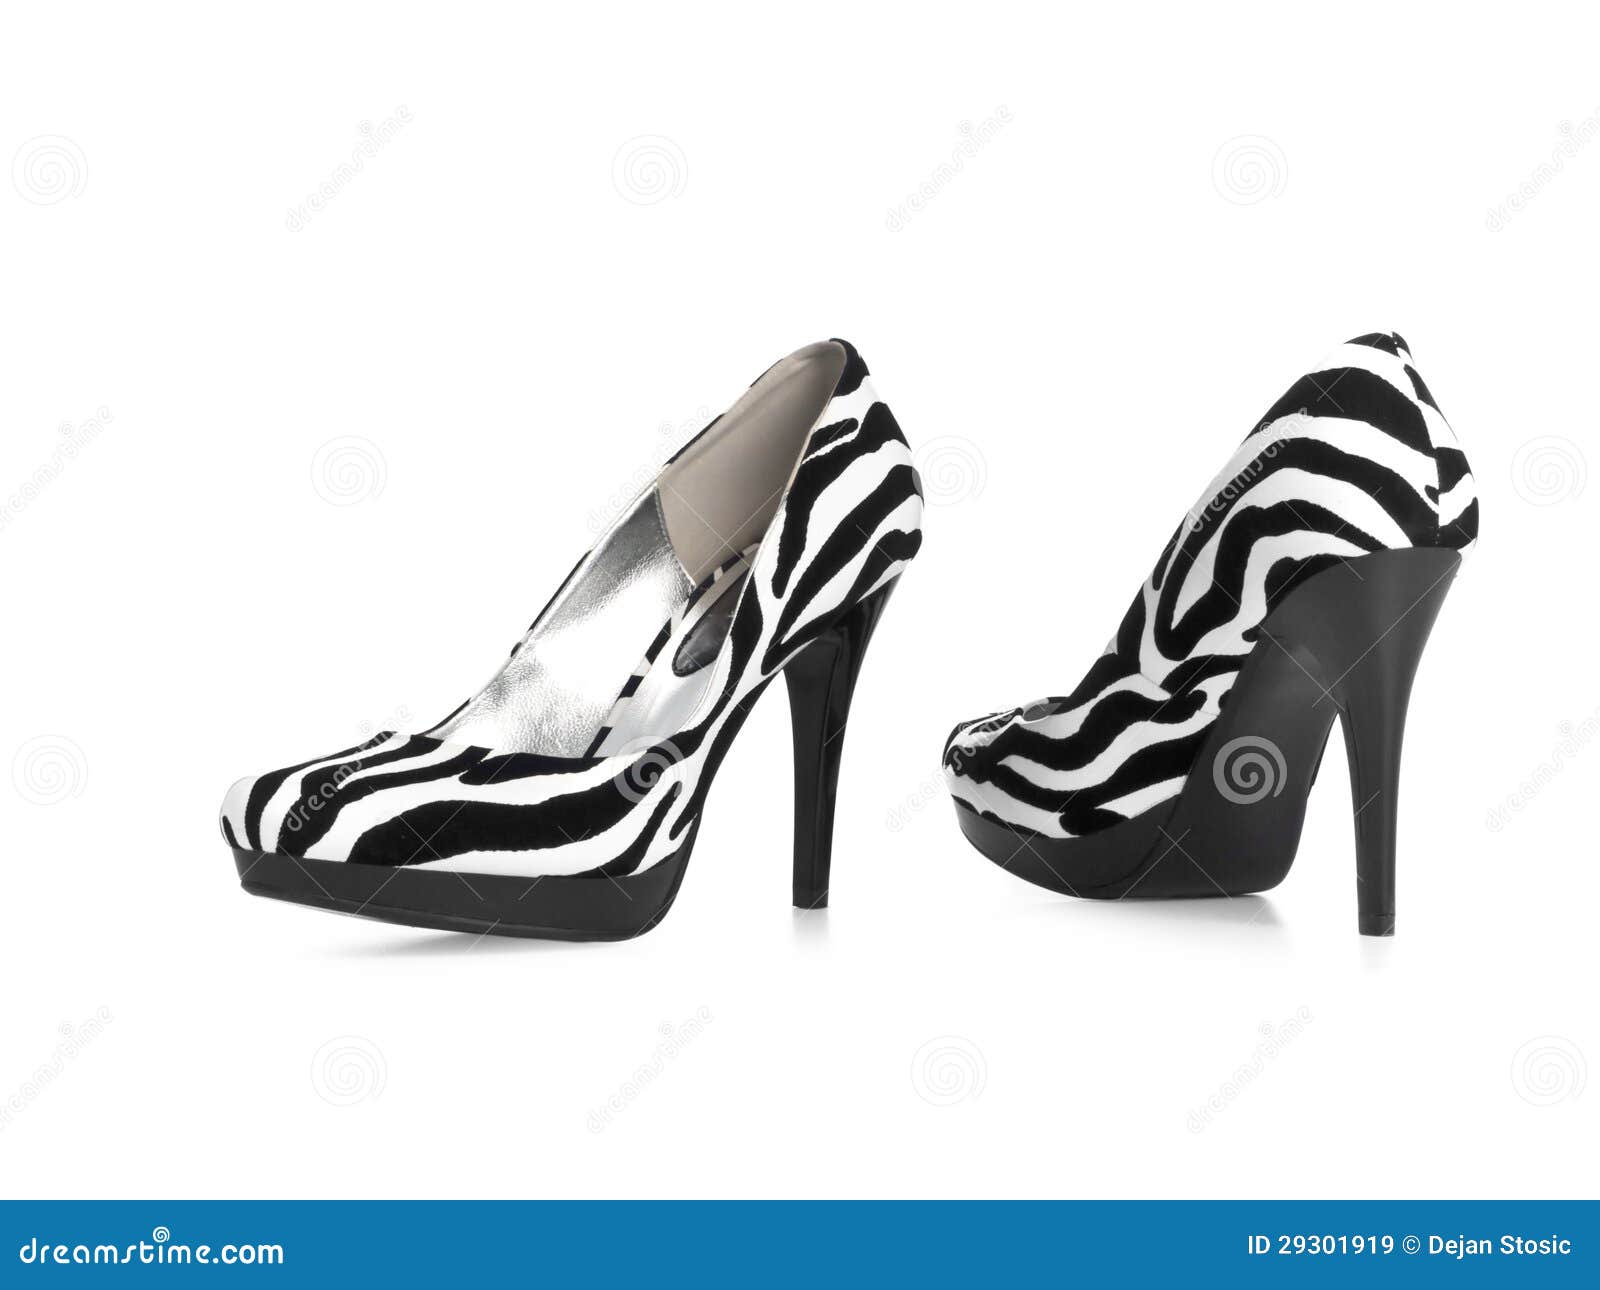 Zebra High Heel Shoes, Royalty Free Stock Images - Image: 29301919